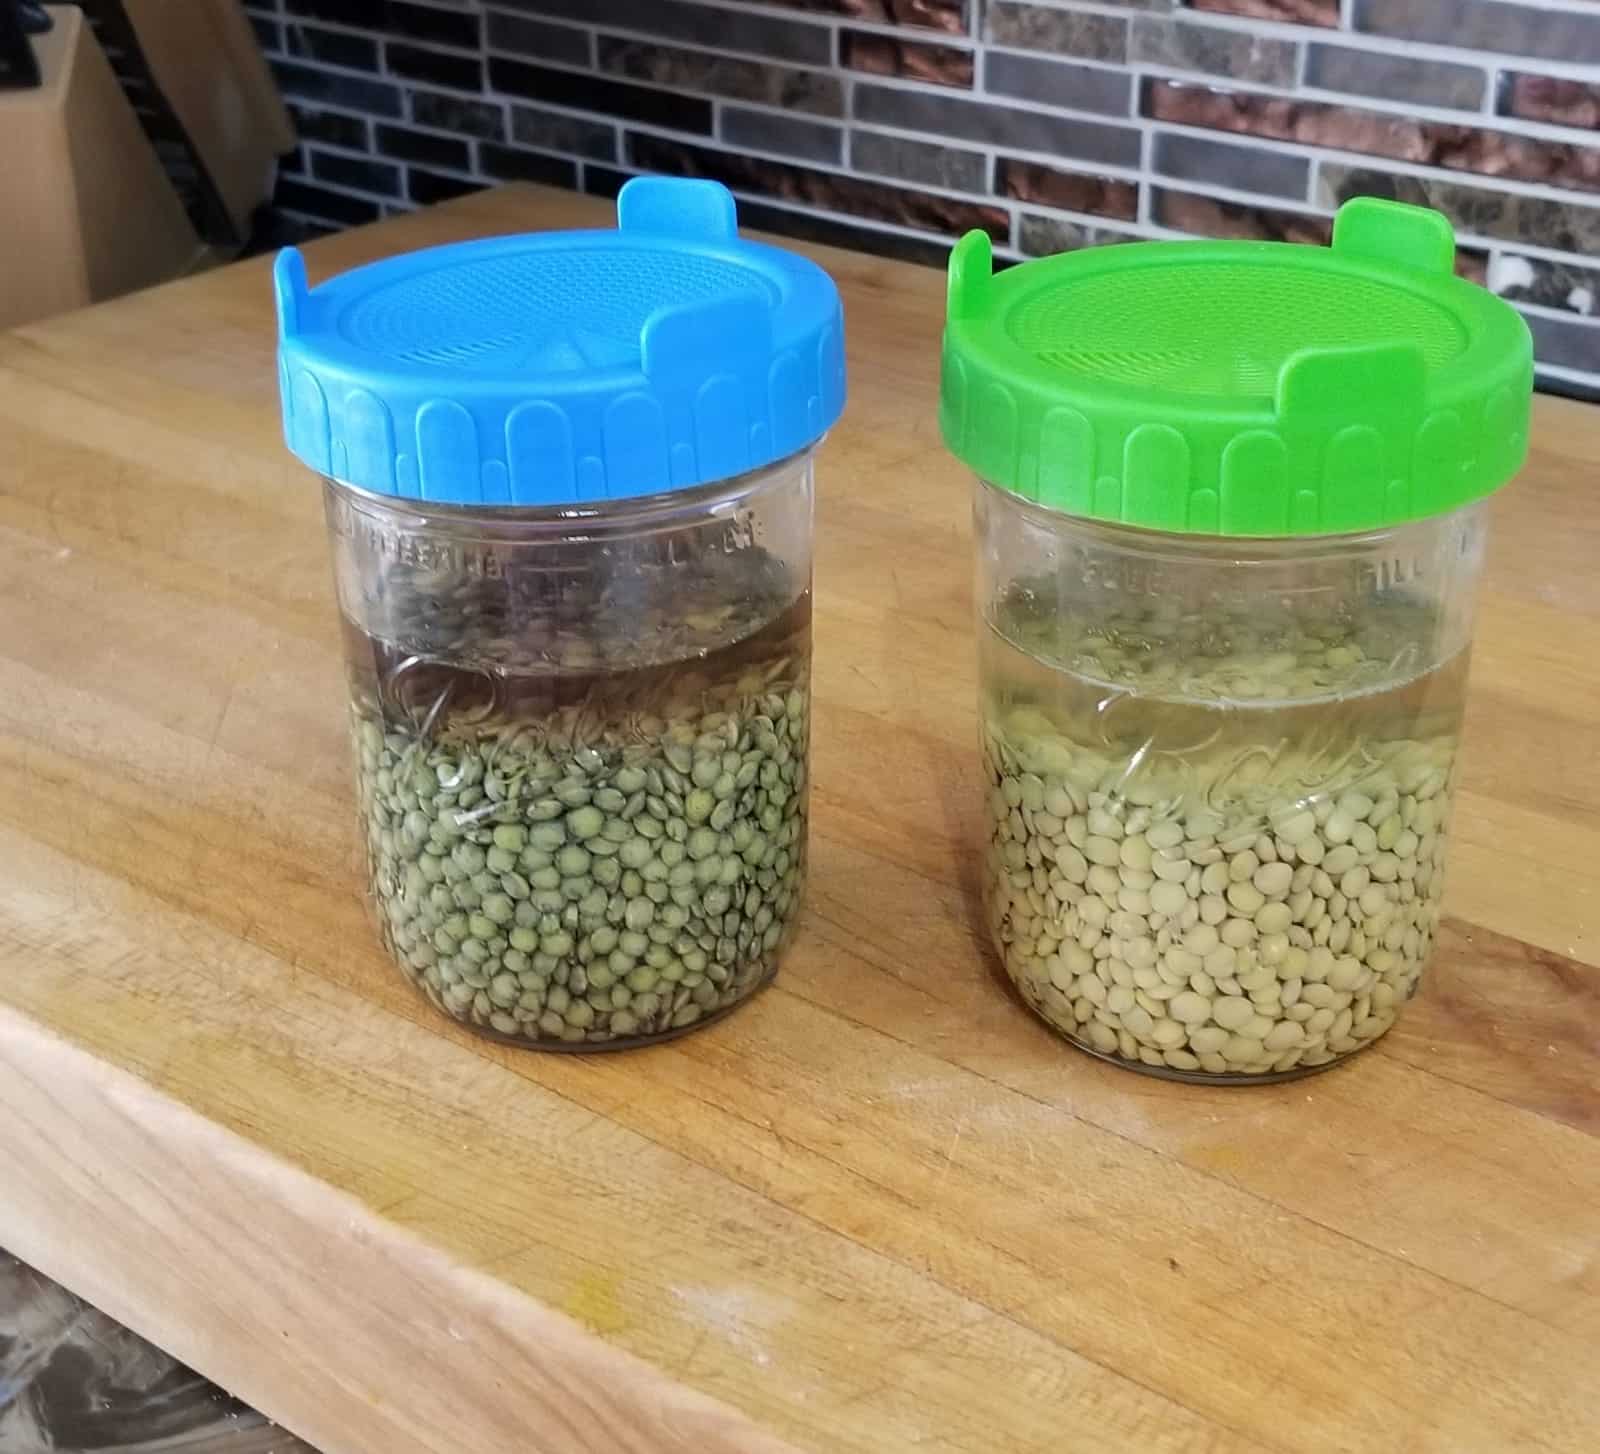 How to sprout lentils at home